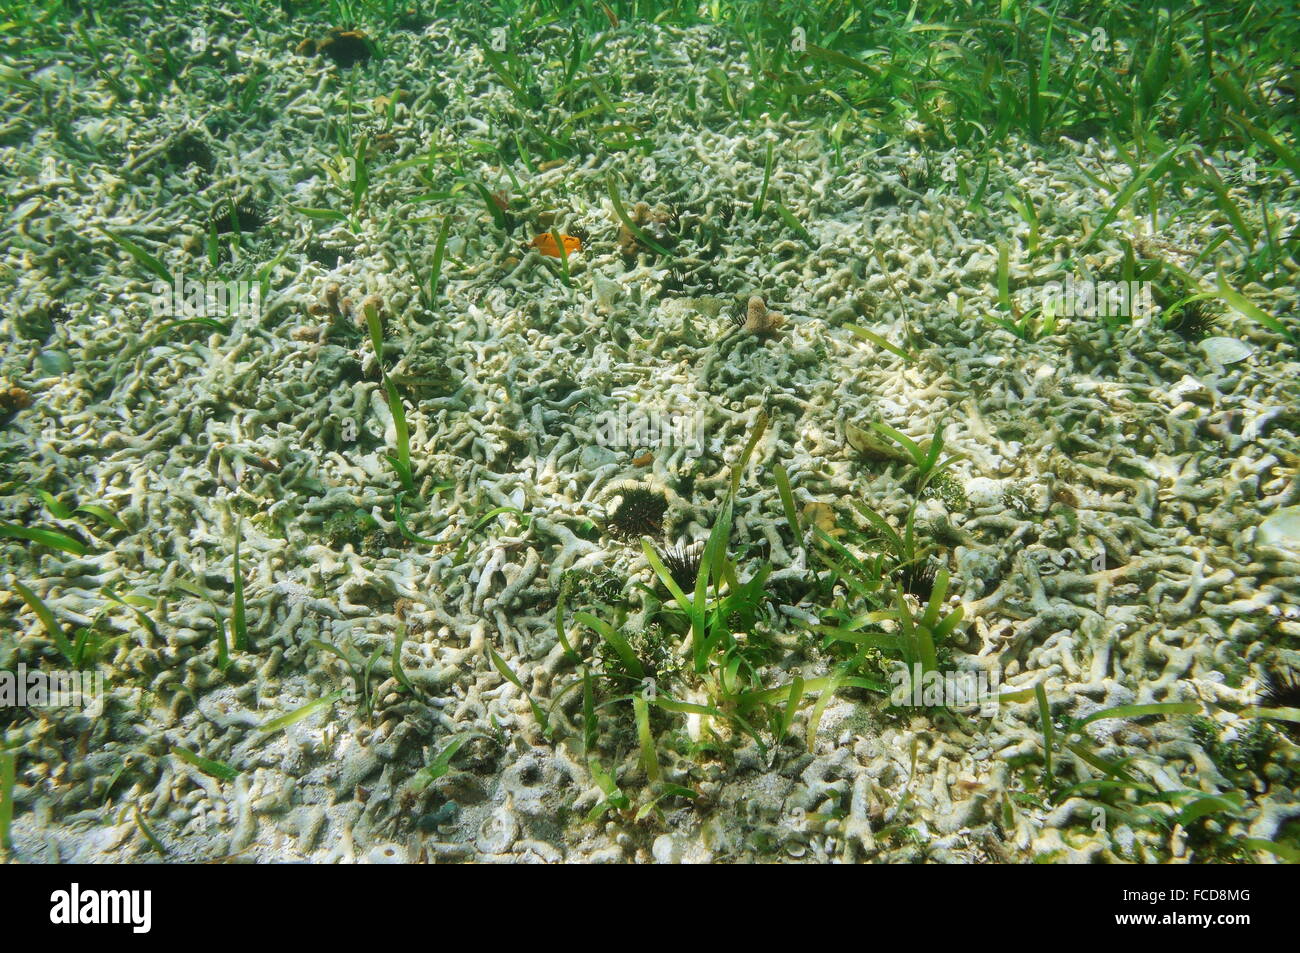 Underwater on a shallow seabed with corals entirely destroyed by coastal development issues on the shore of the Caribbean sea Stock Photo